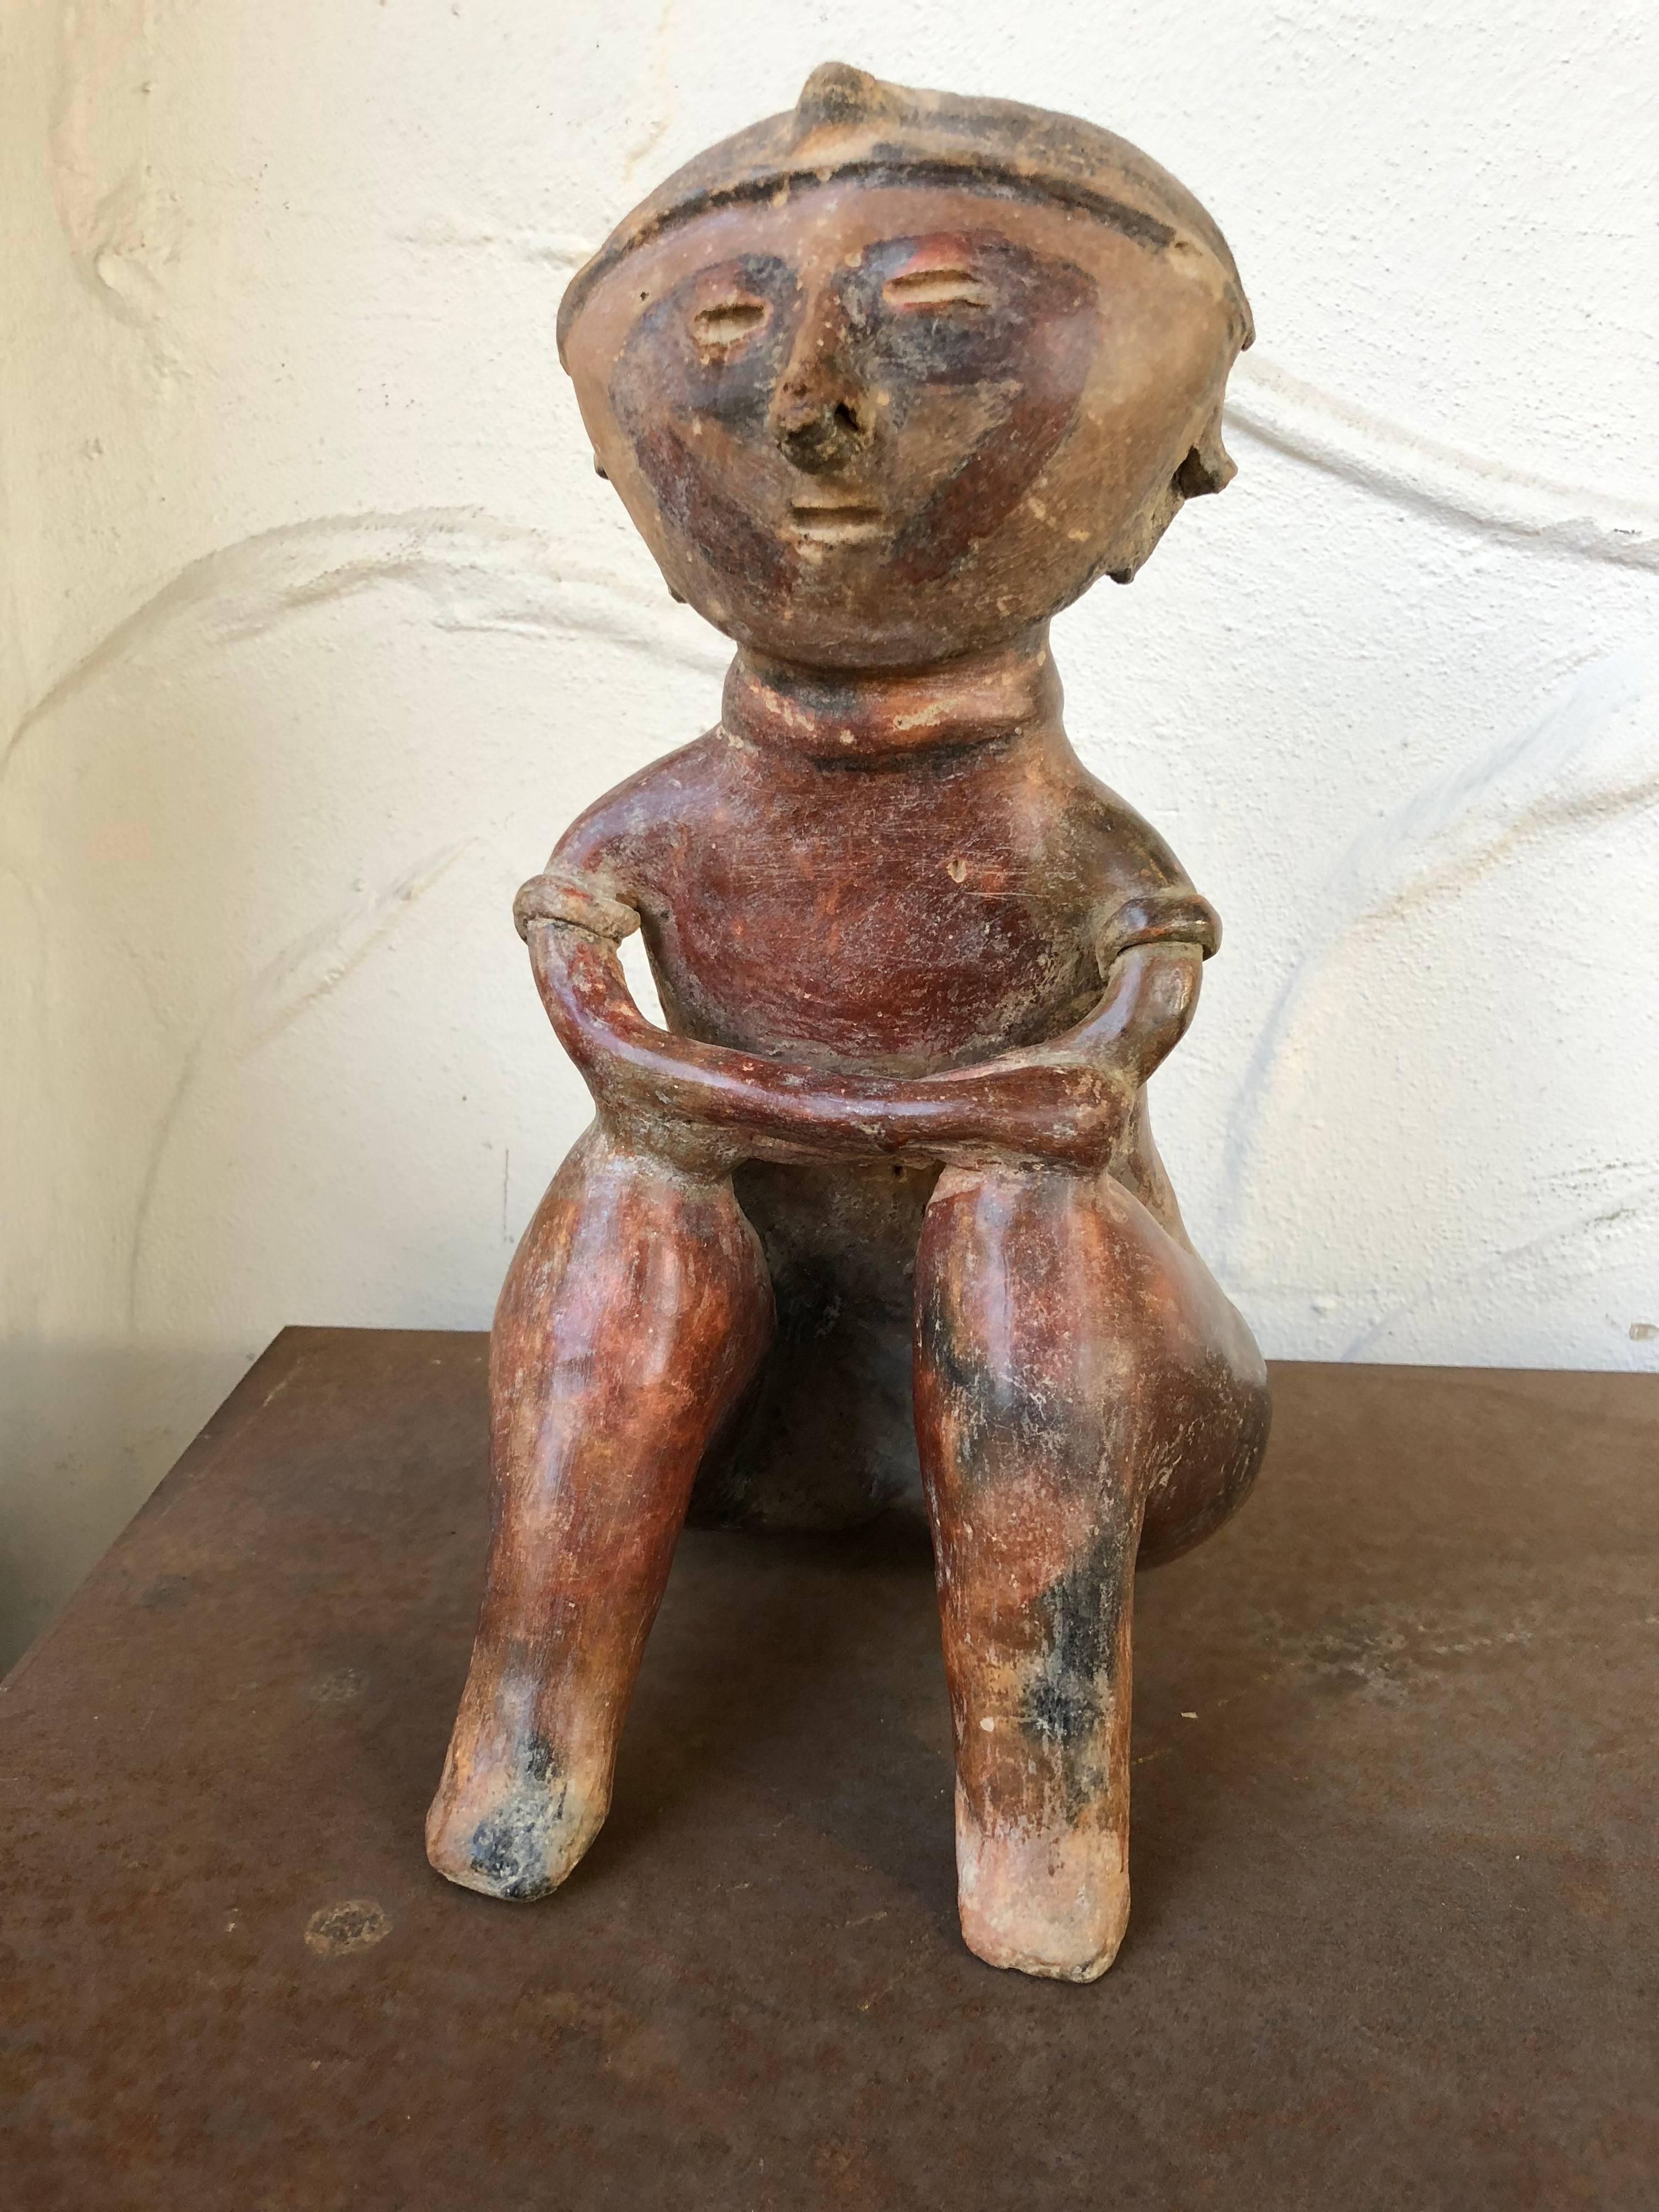 Provenance: Sothebys NY

Excellent overall condition for its age, old hairline separation in inner thigh area, as shown in image.

The Western Mexico shaft tomb tradition or shaft tomb culture refers to a set of interlocked cultural traits found